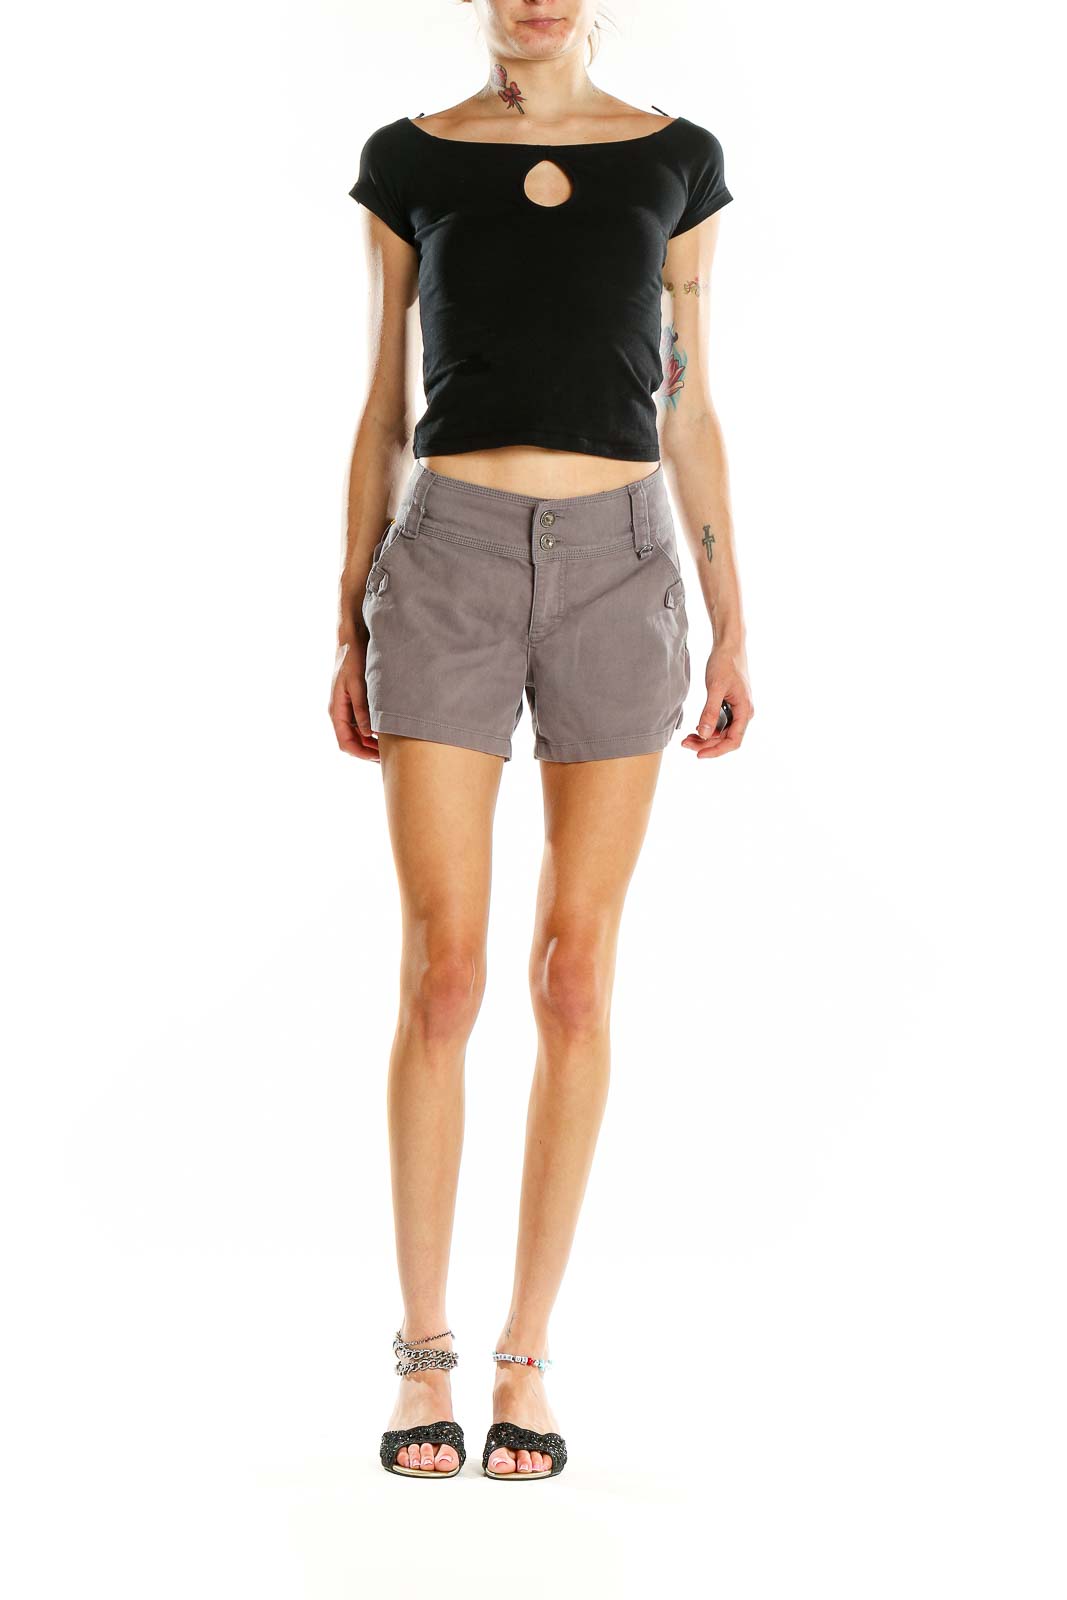 Shop Shorts With or | Points Cash SilkRoll